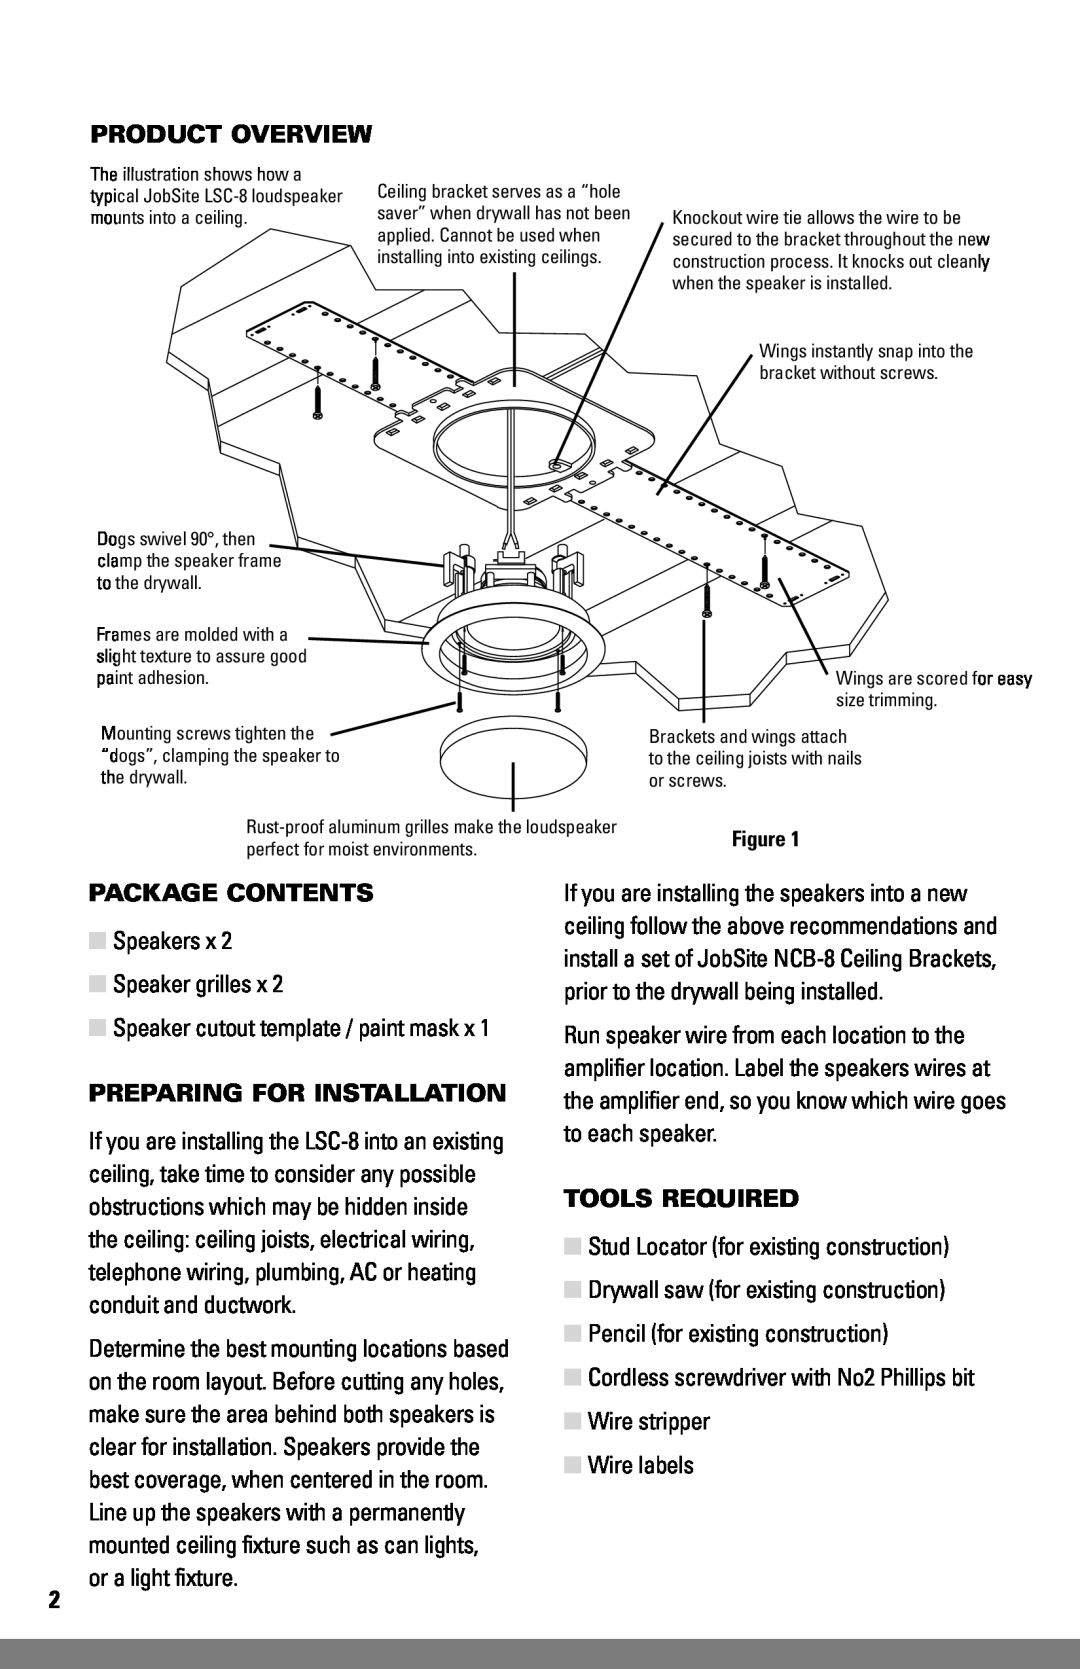 JobSite Systems LSC-8 manual Product Overview, Package Contents, Preparing For Installation, Tools Required 